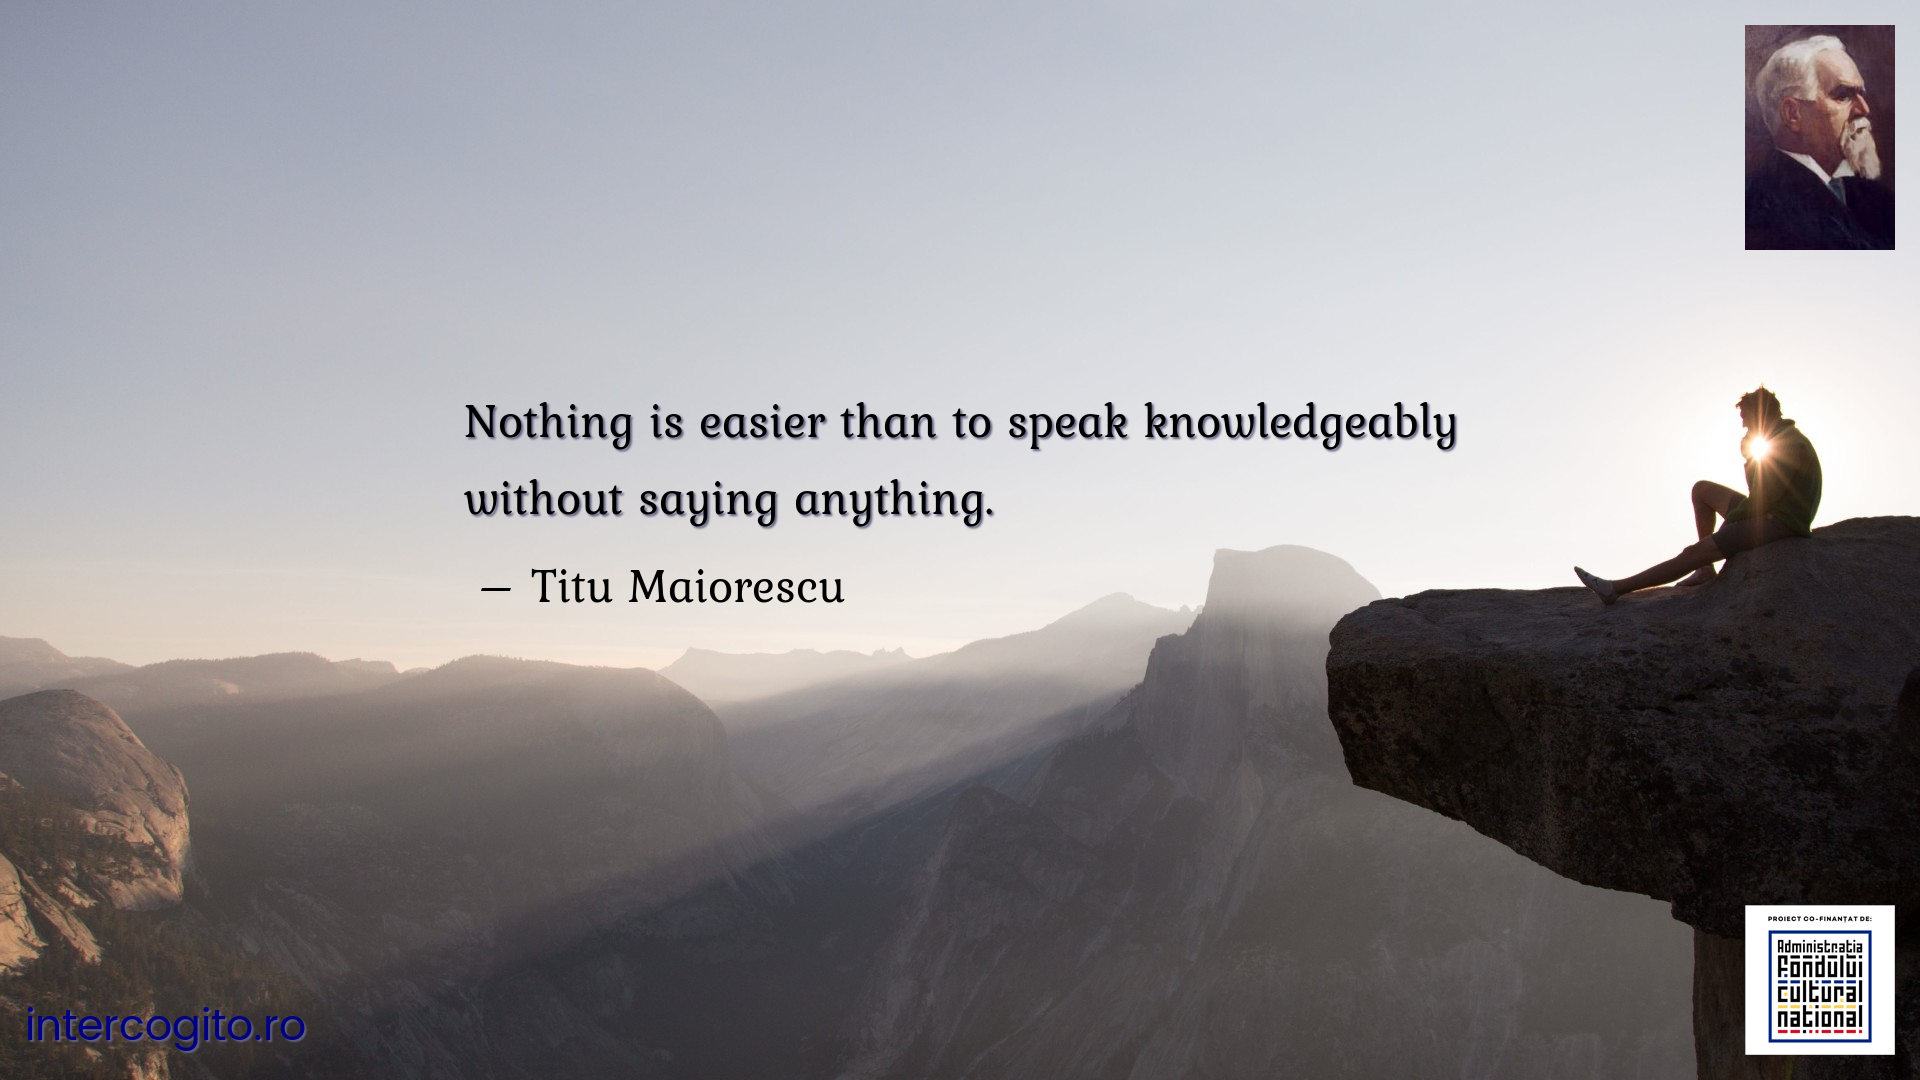 Nothing is easier than to speak knowledgeably without saying anything.